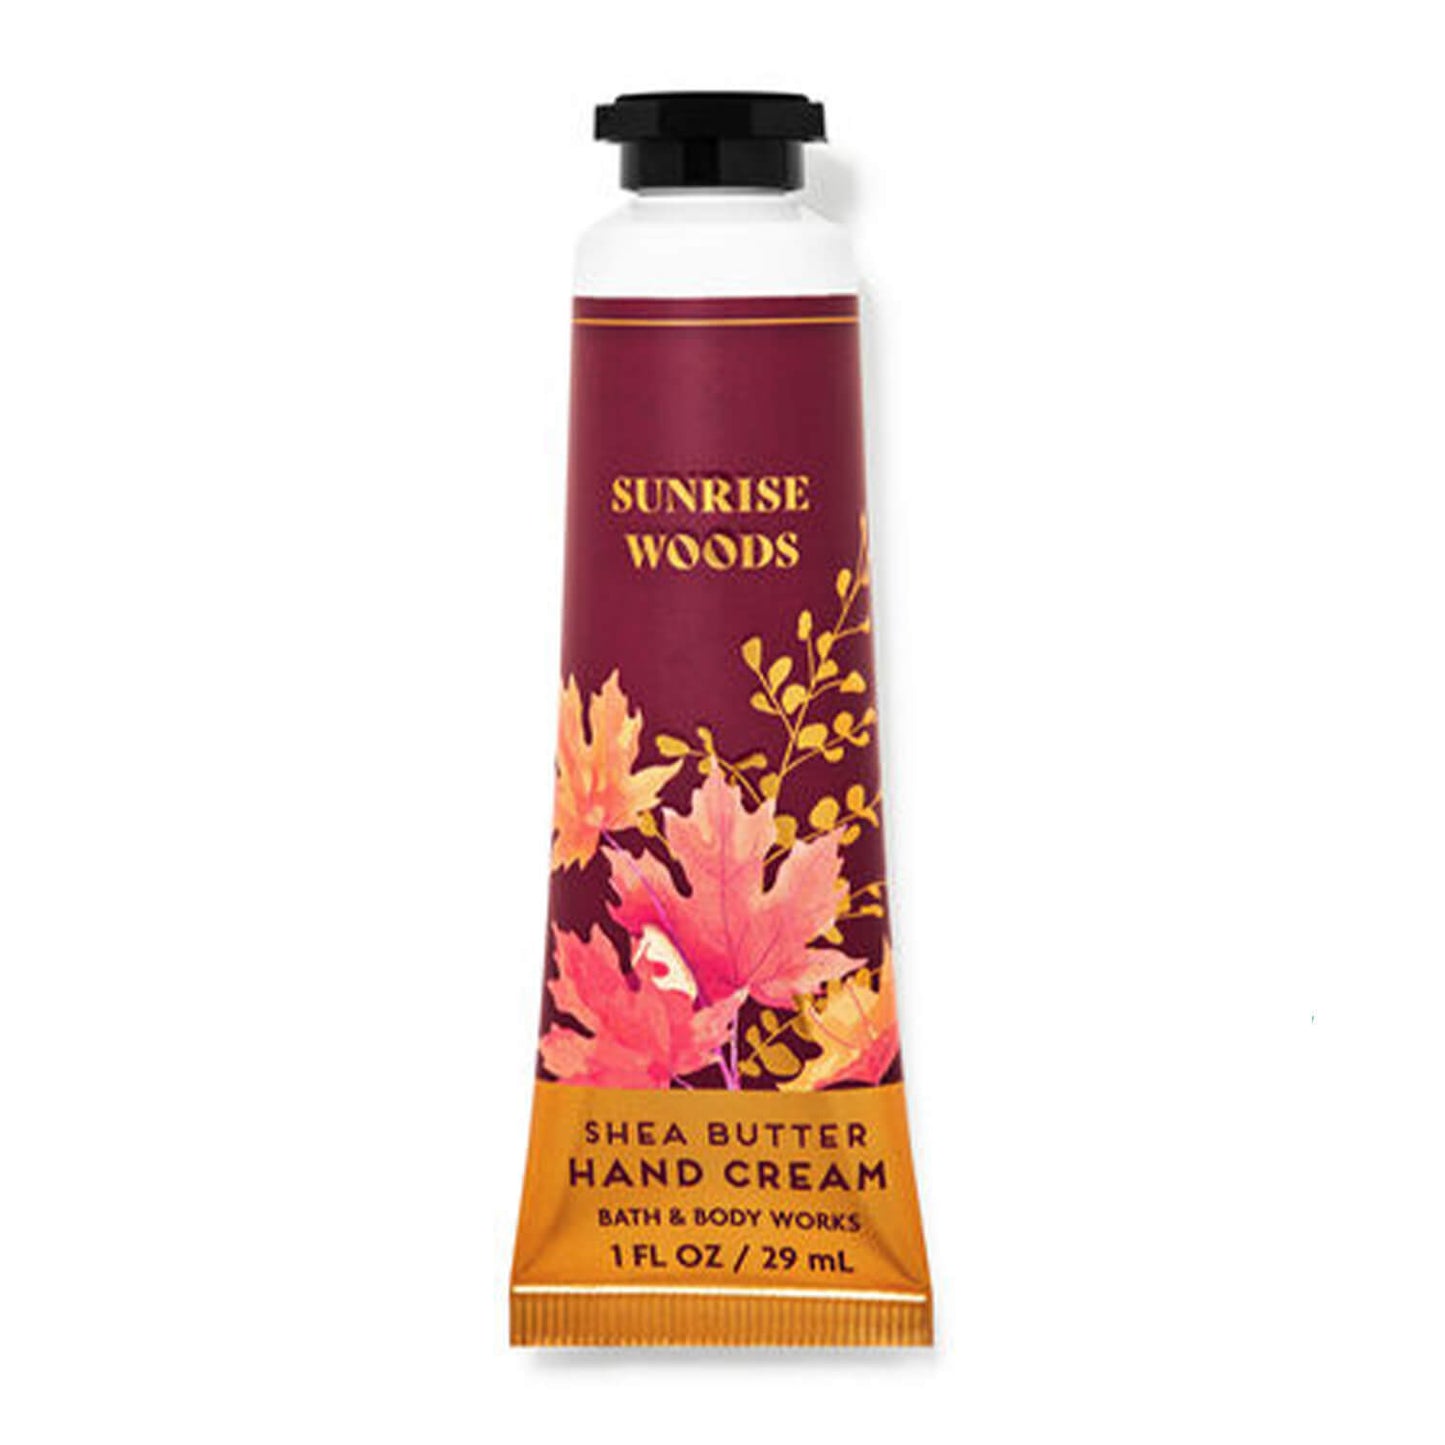 Shop bath and body works hand cream in sunrise woods available at Heygirl.pk for delivery in Pakistan